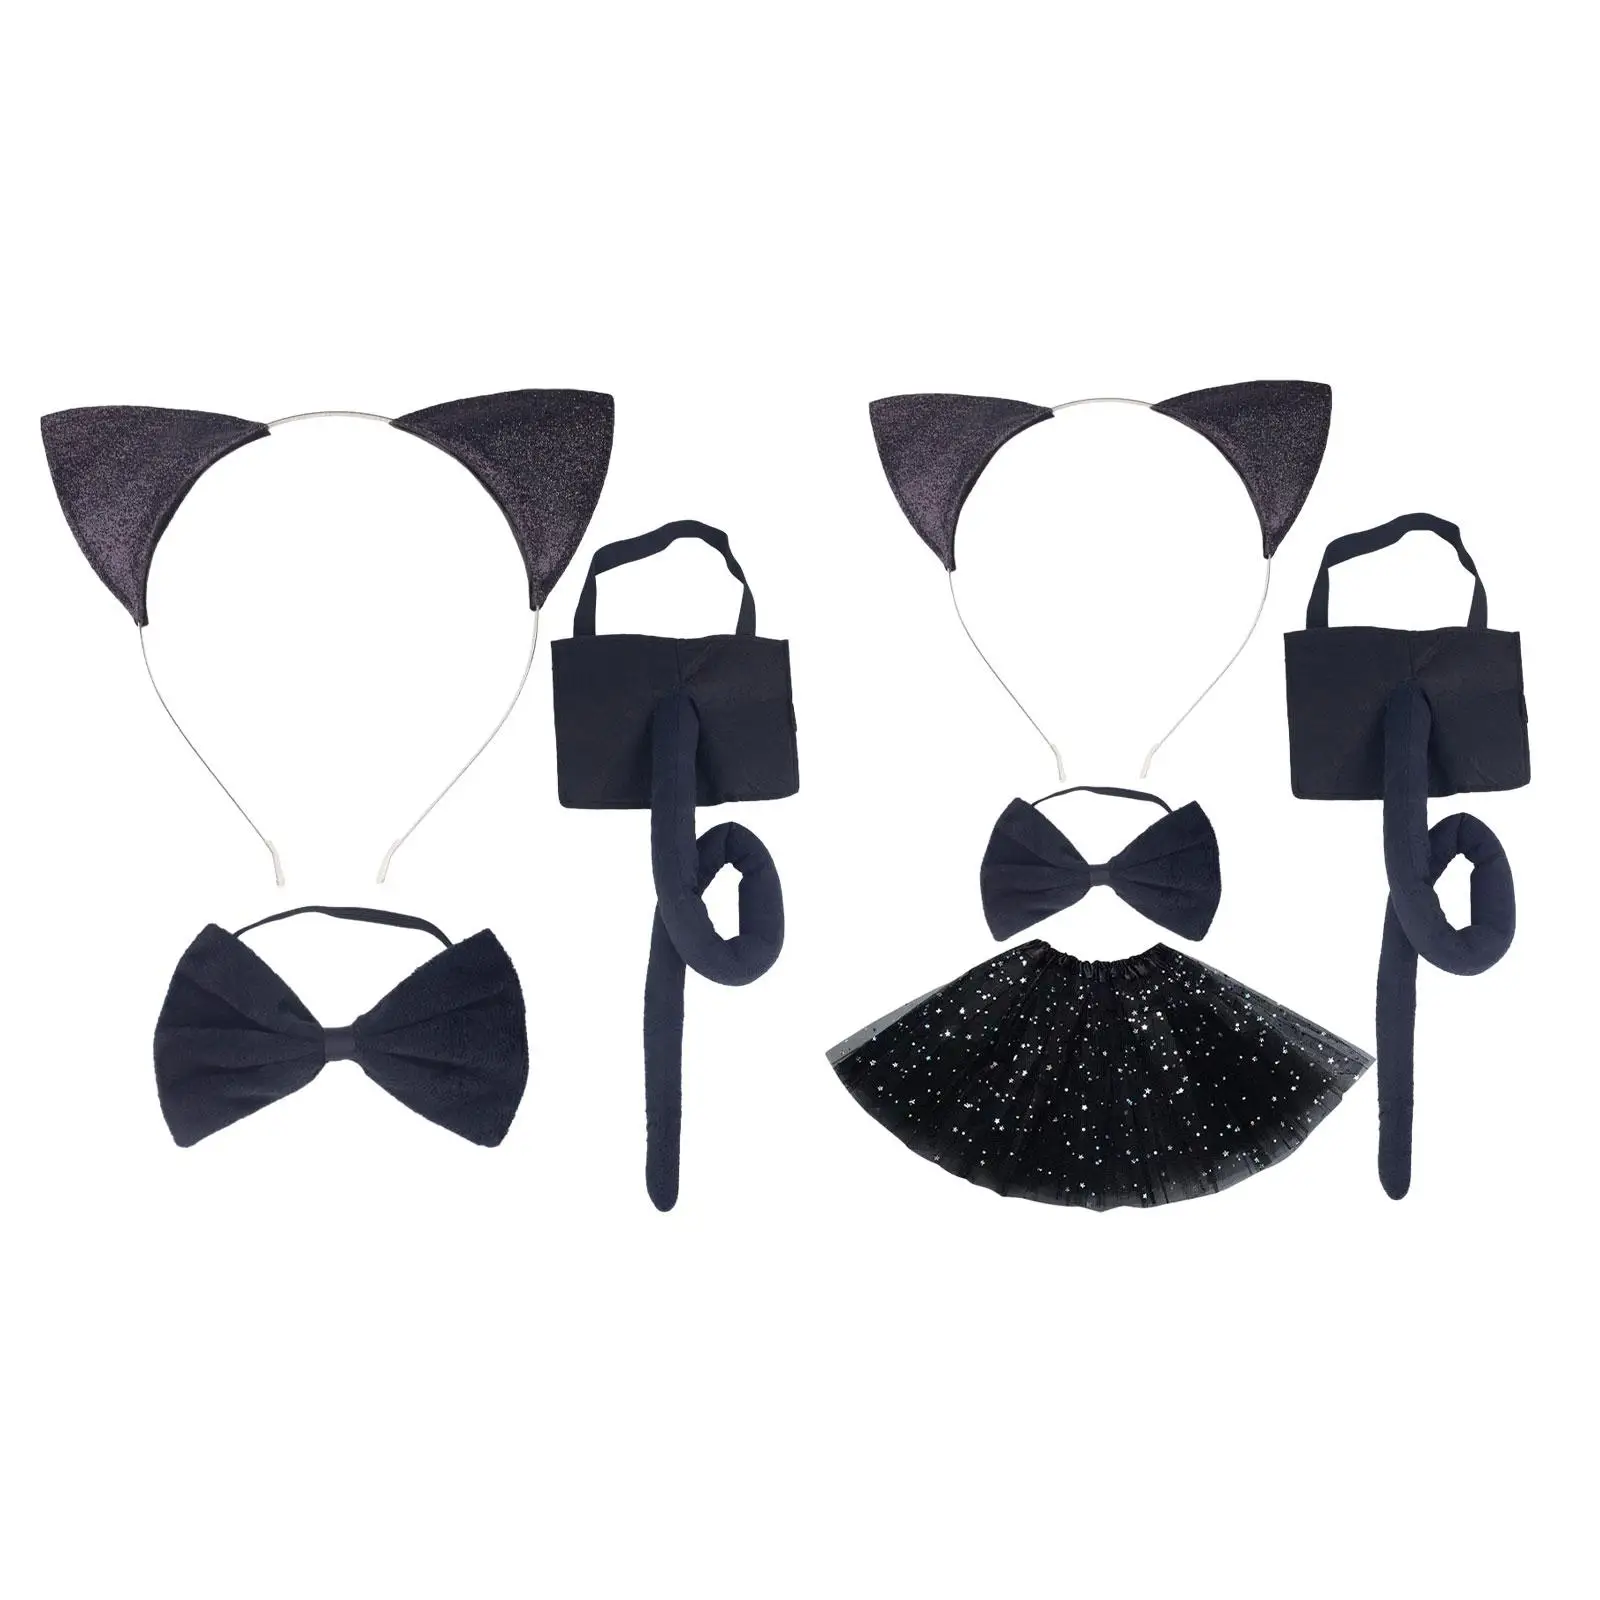 Kids Cat Ears, Bow Tie and Tail Set Comfortable Animal Costume Set for Themed Party Performance Dressing up Birthdays Roles Play